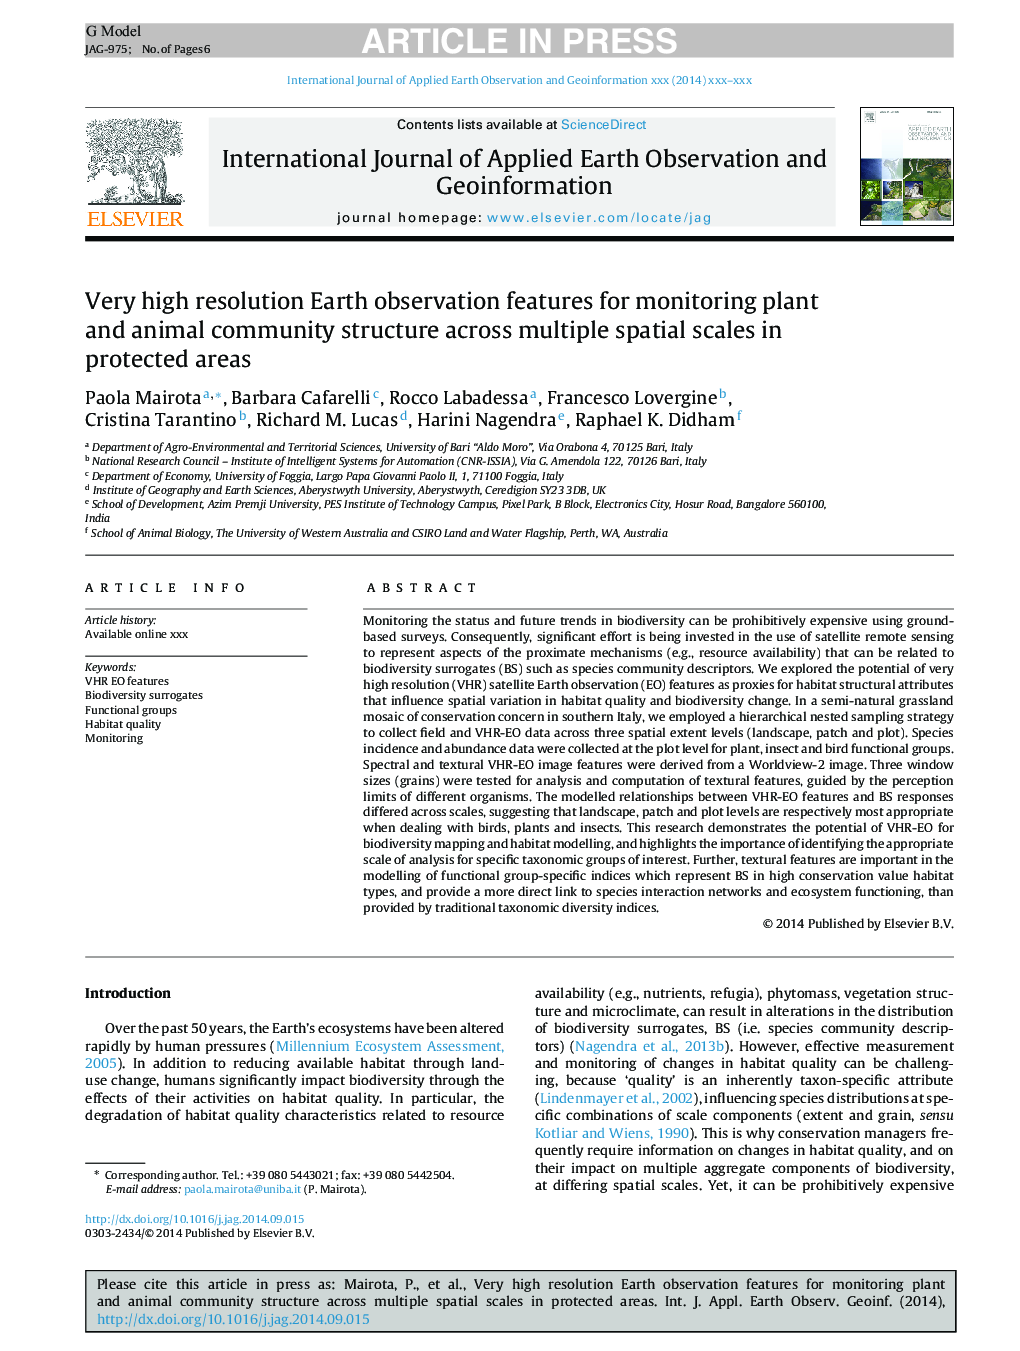 Very high resolution Earth observation features for monitoring plant and animal community structure across multiple spatial scales in protected areas